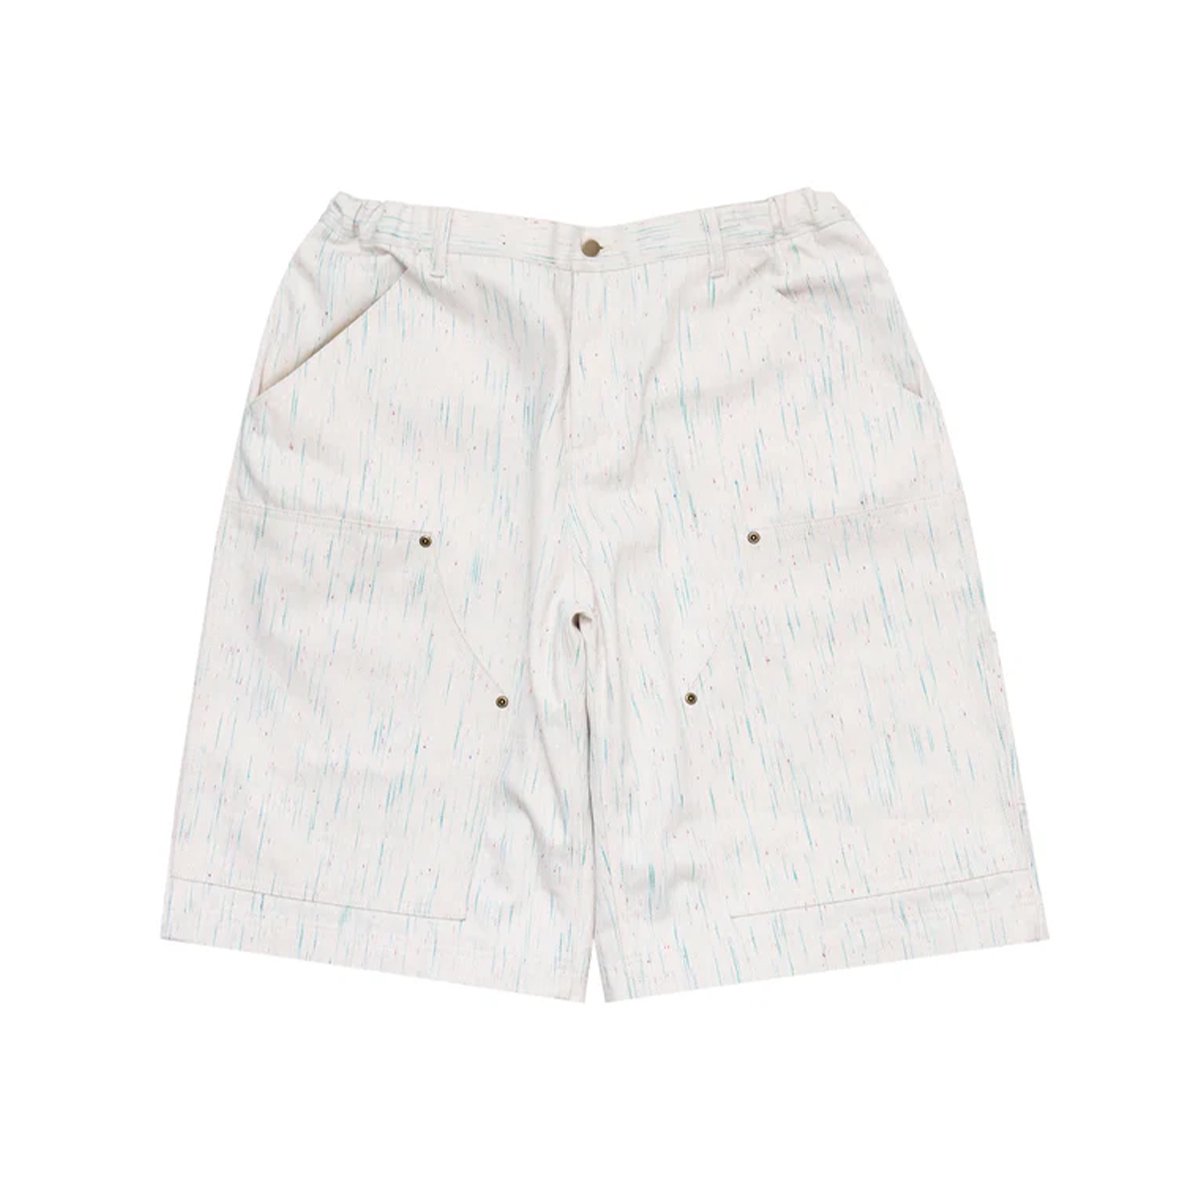 WhimsyPainter Baggy Shorts (White)
                          </a>
            <span class=